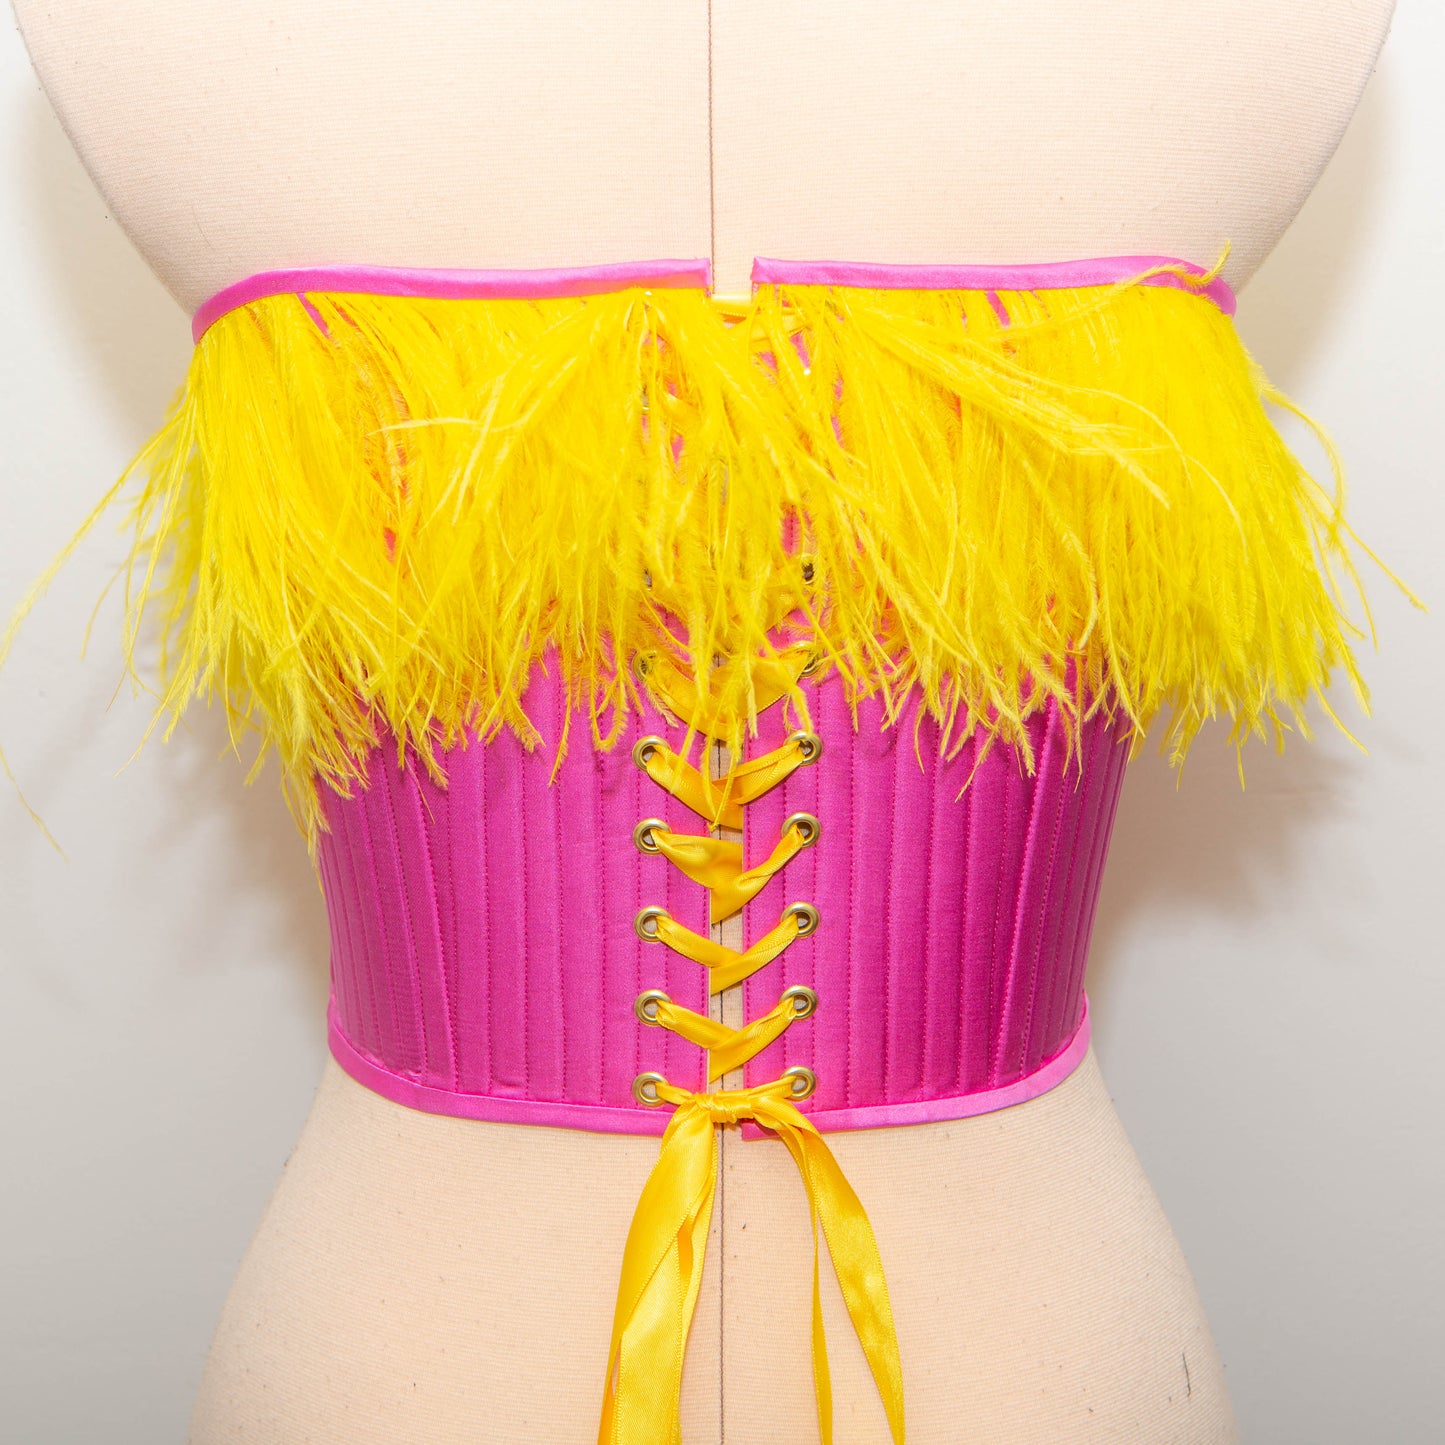 SAMPLE - Pink/Yellow Silk Short Stays With Feather Trim - UK 8-10